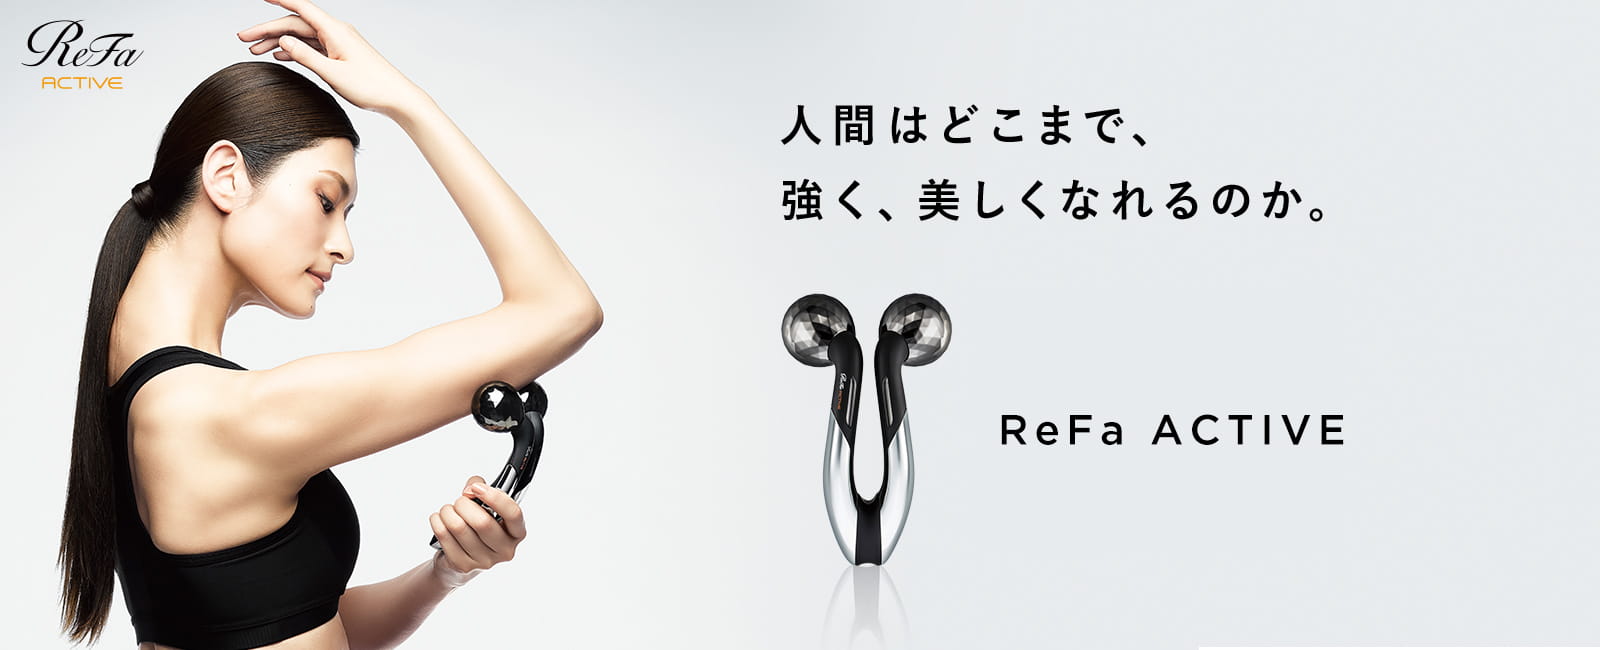 ReFa ACTIVE－リファ アクティブ 公式通販サイト | MTG ONLINESHOP